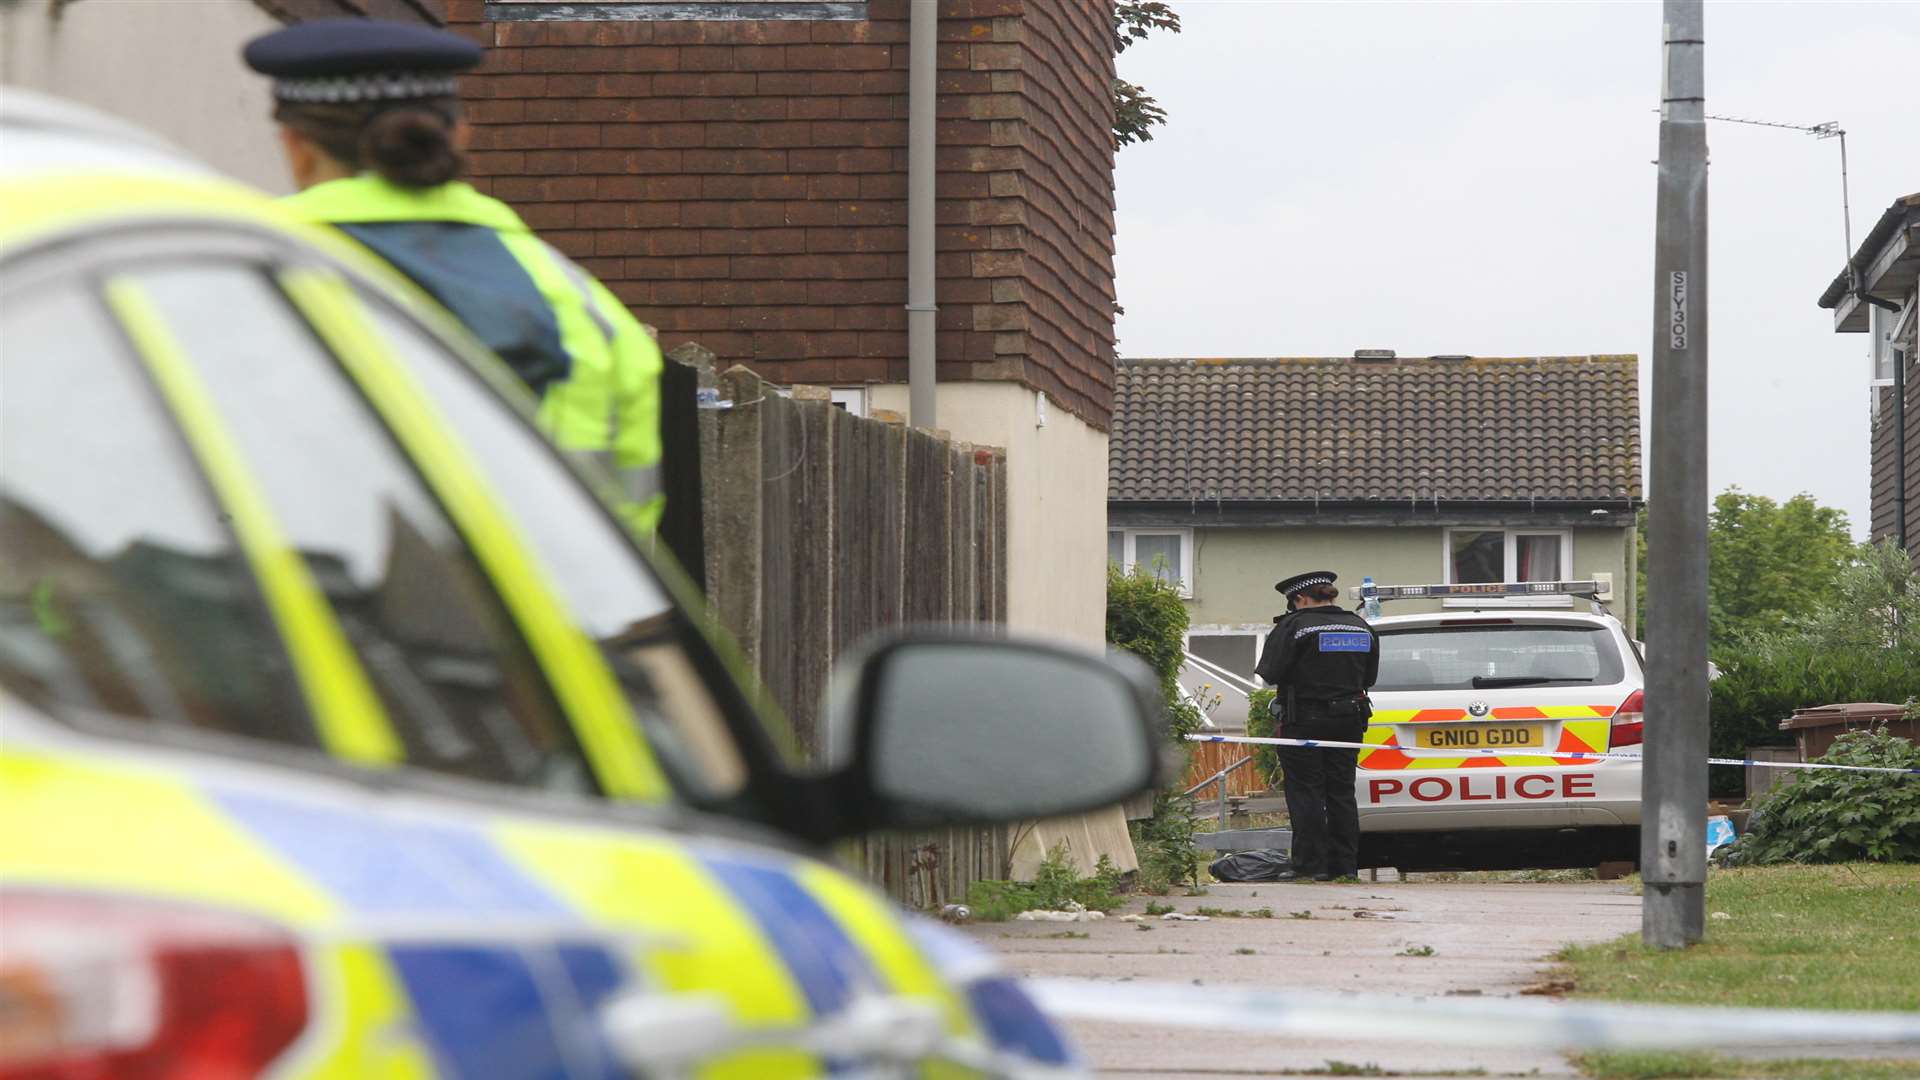 Kincross Close, Chatham, where Mr Berry's body was found on Sunday, July 12. Picture: John Westhrop